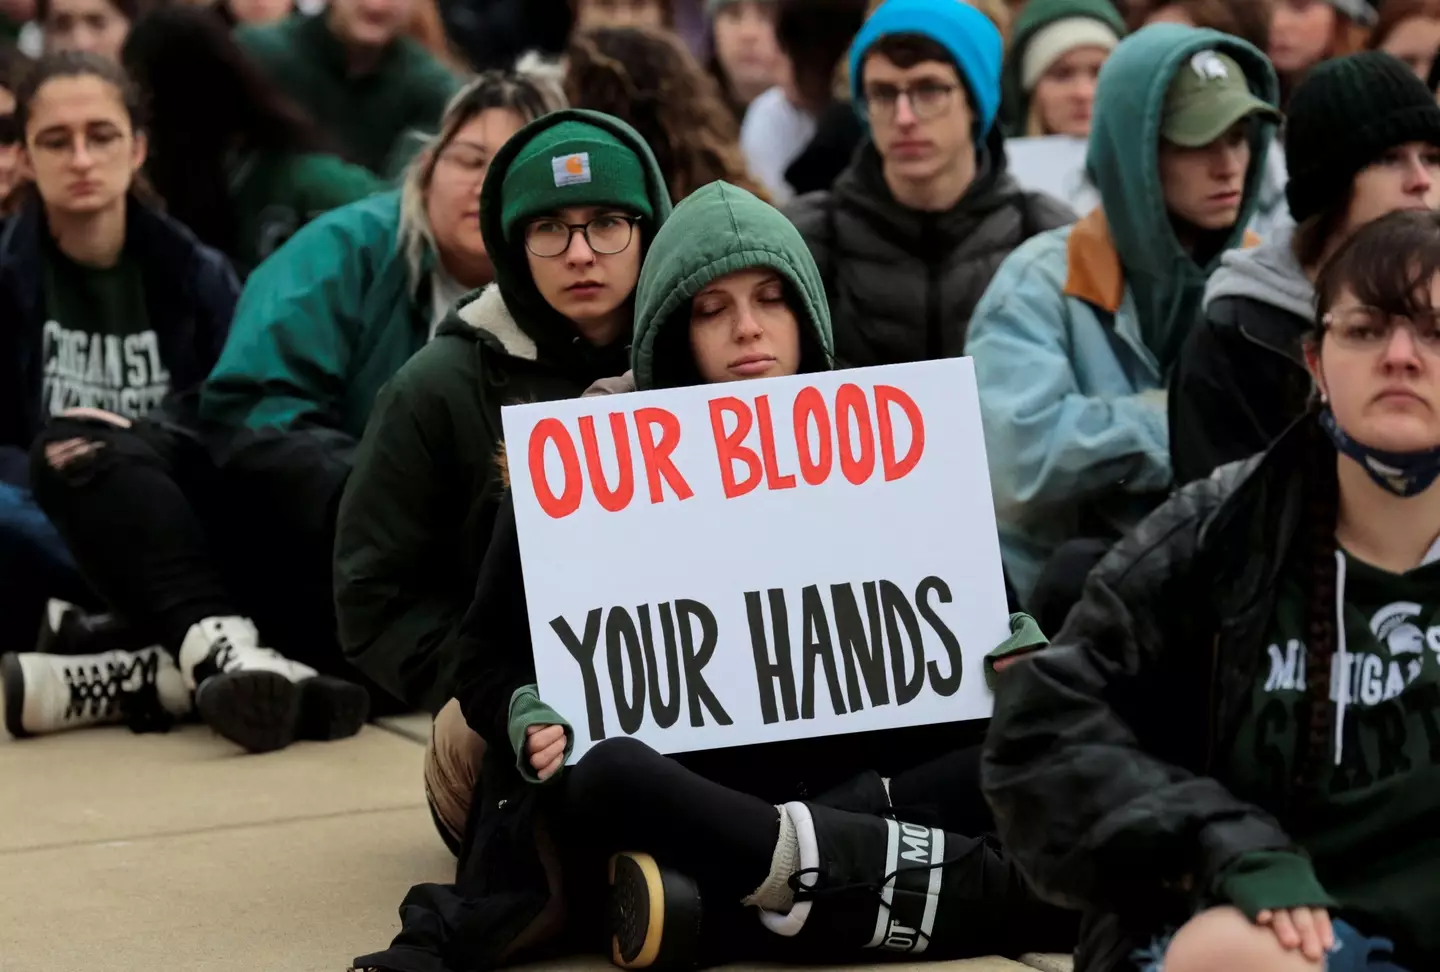 Students at Michigan State University protested in front of the State Capitol against guns following the shooting.